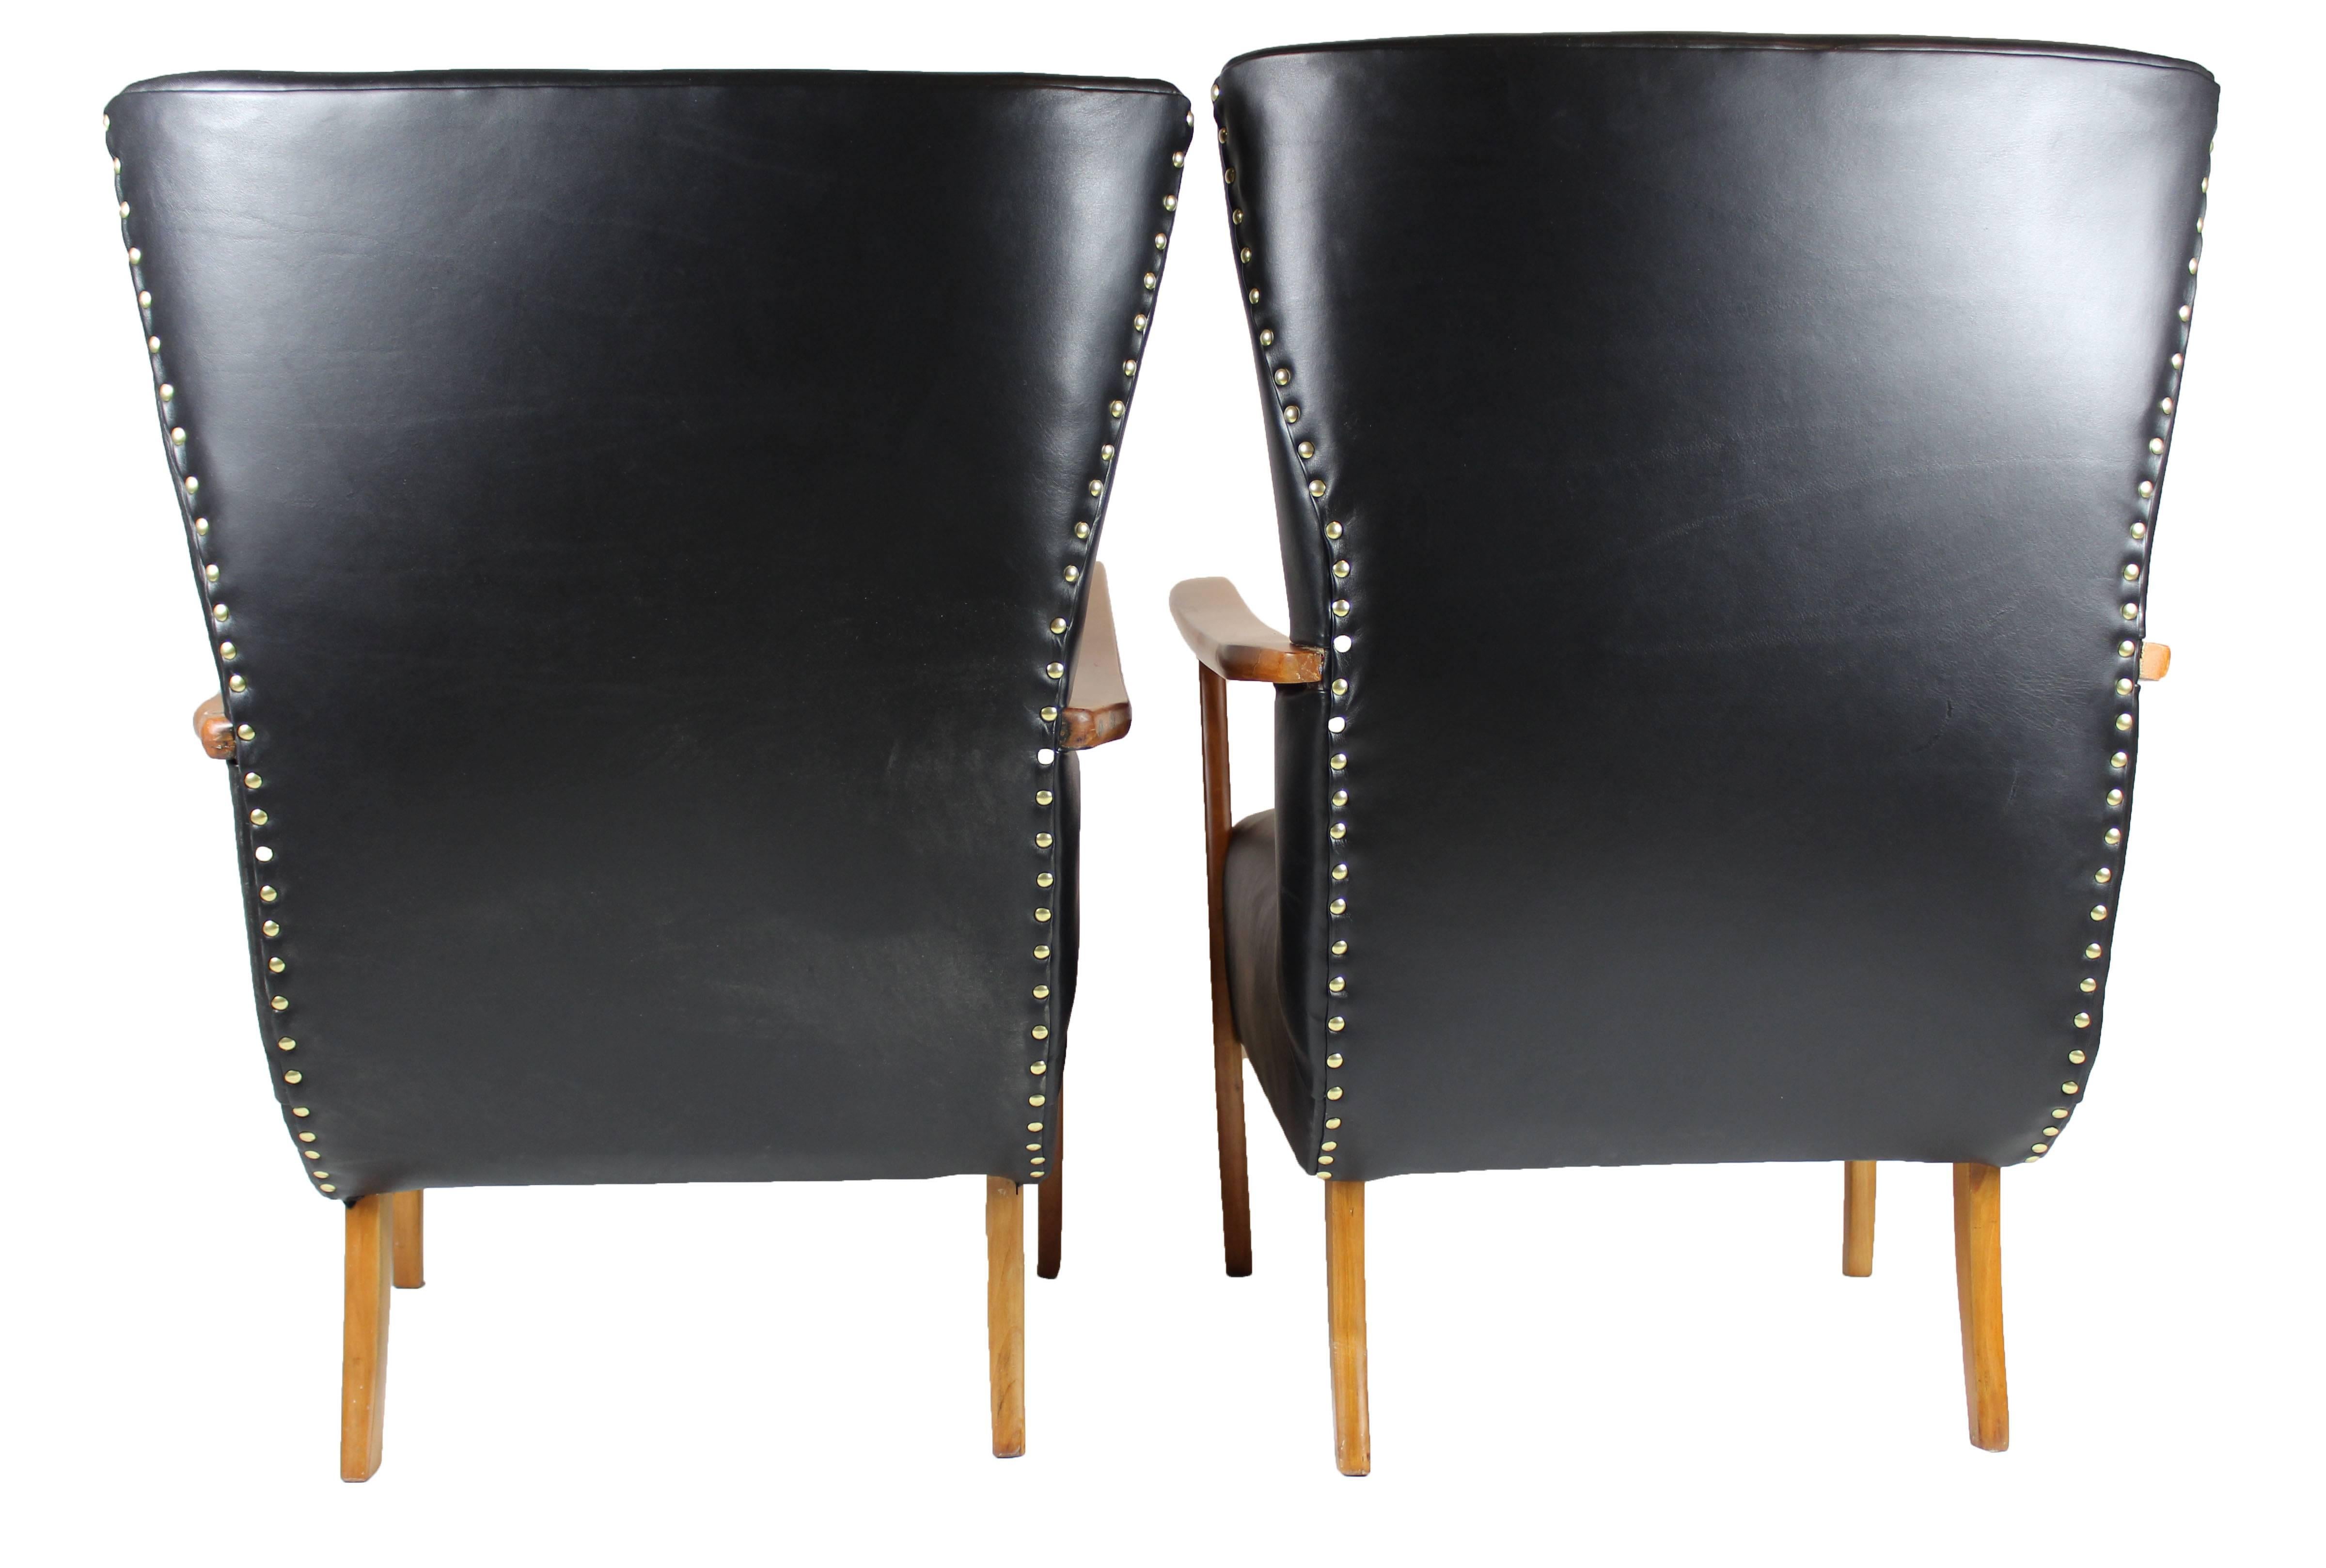 Mid-20th Century Italian Black Leather Pair of Armchairs, 1950s For Sale